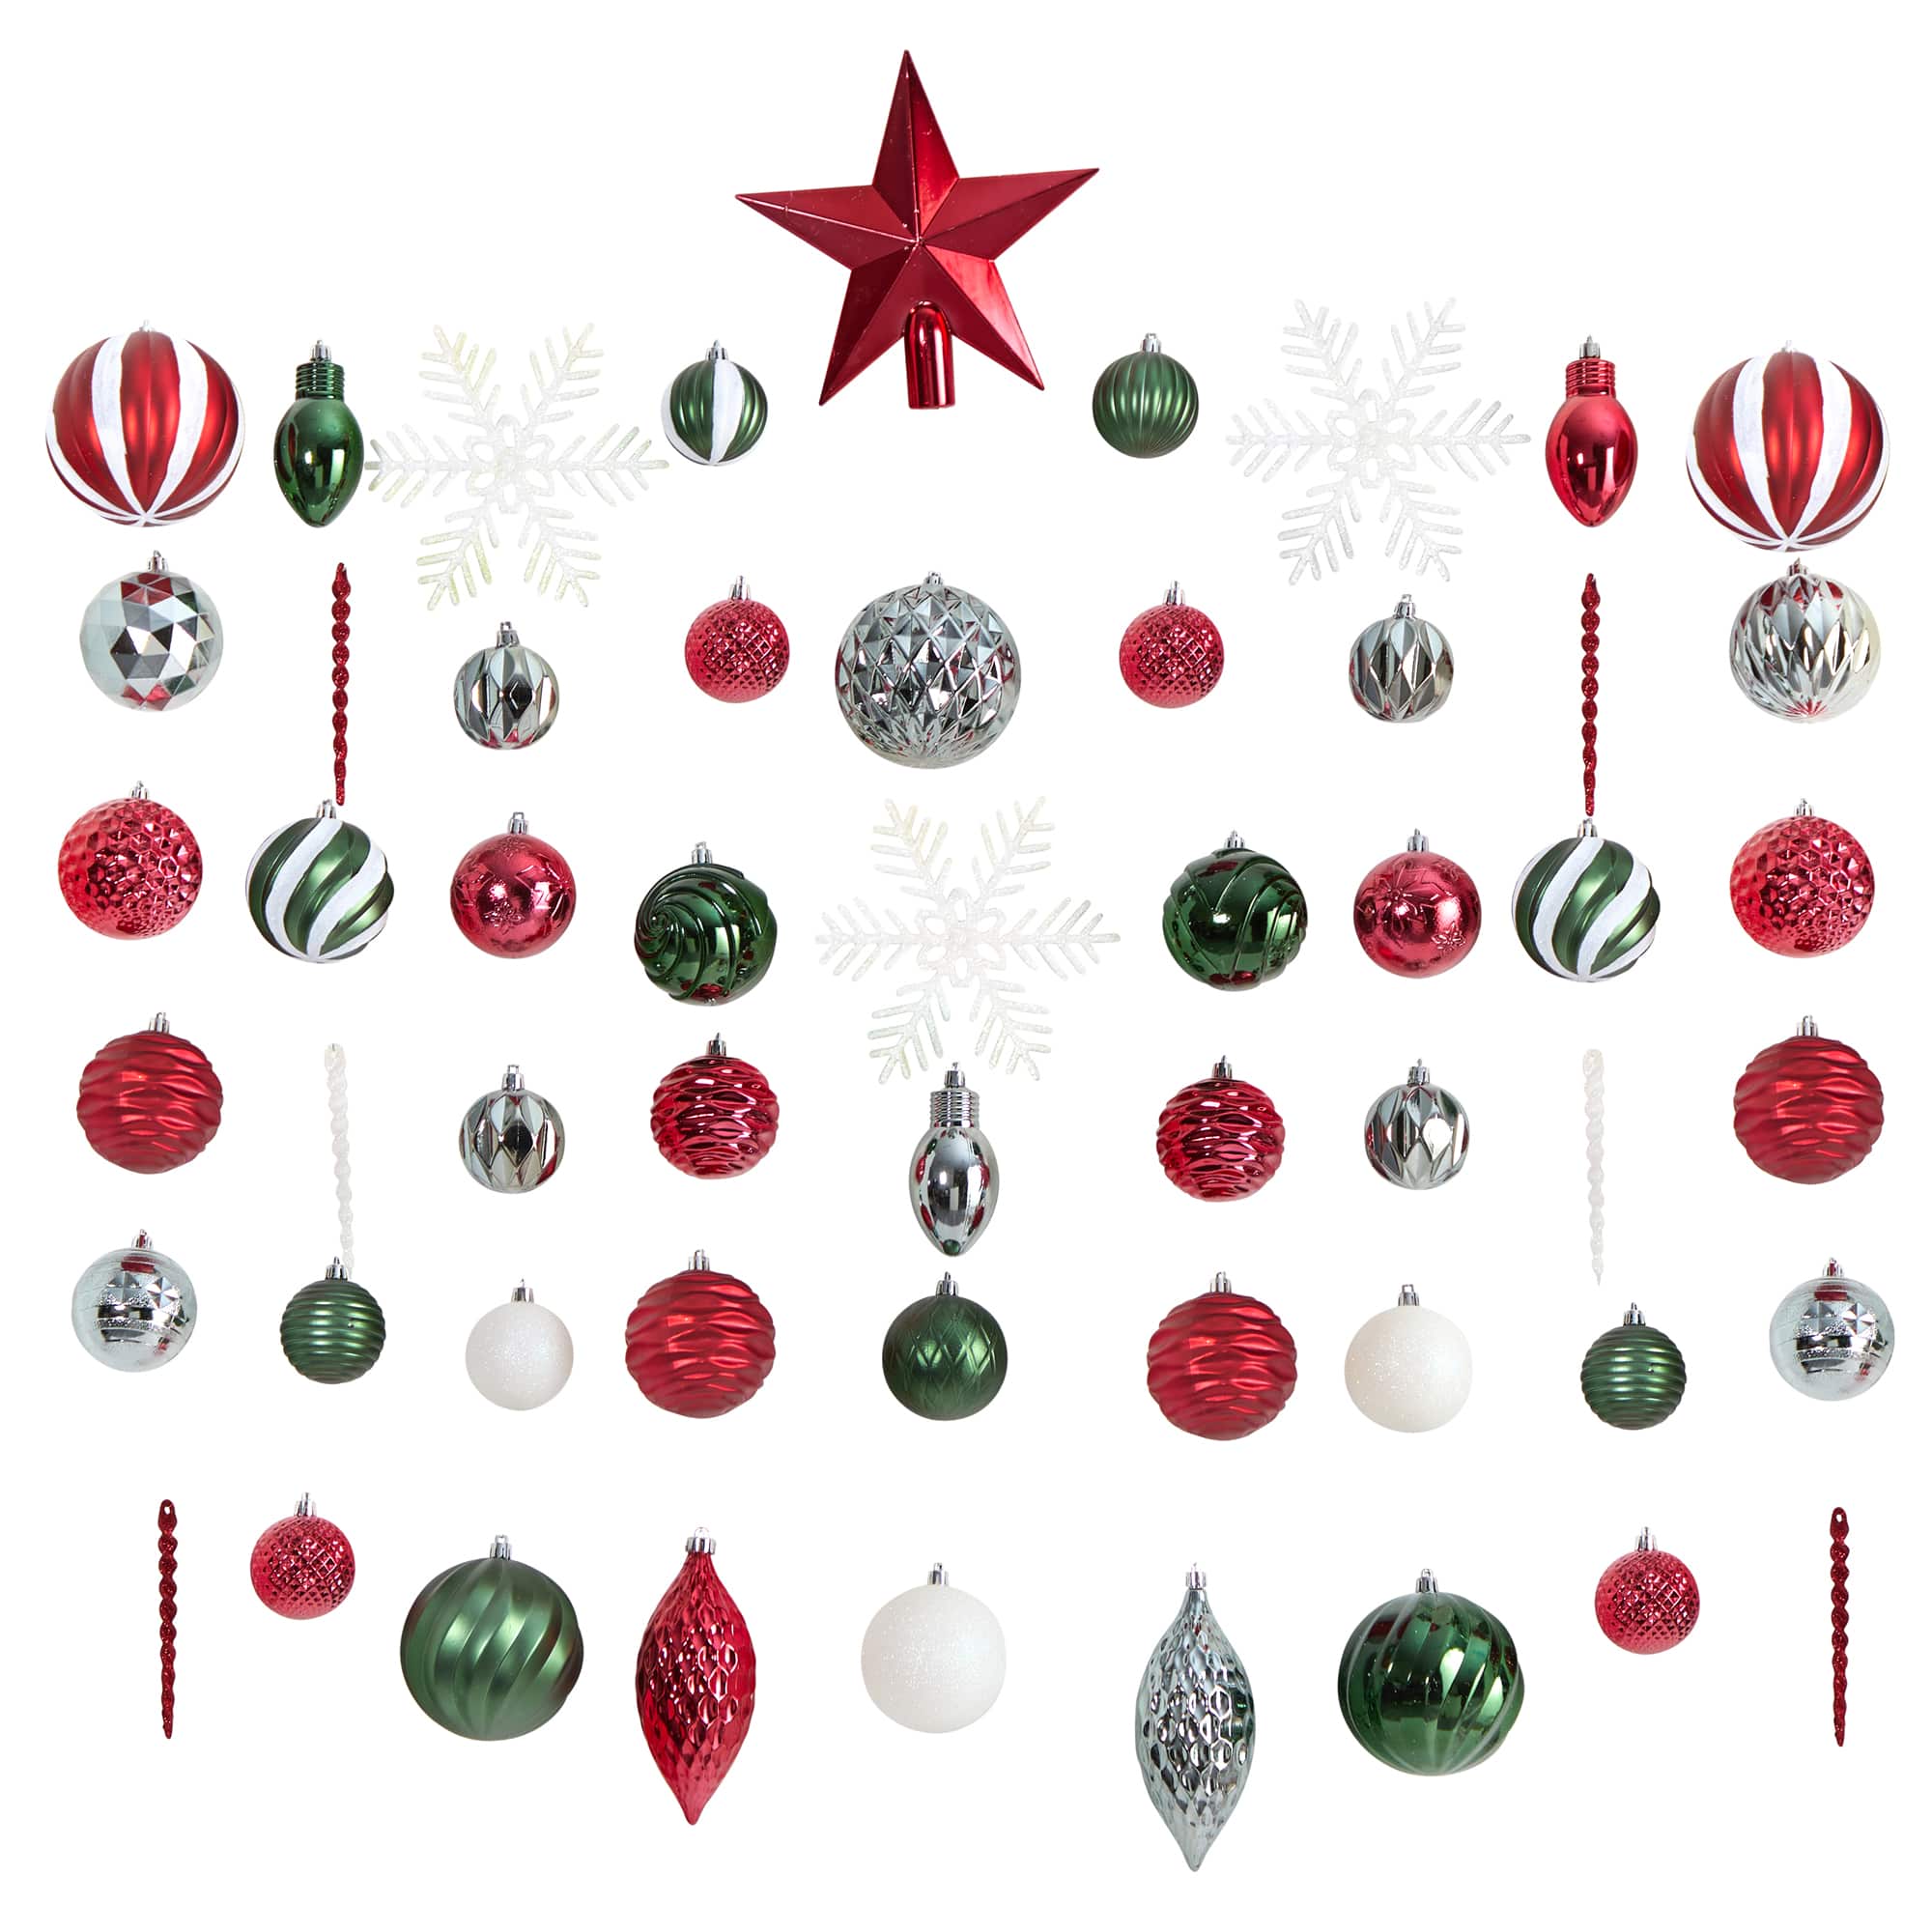 100ct. Holiday Deluxe Shatterproof Christmas Tree Ornament Box Set